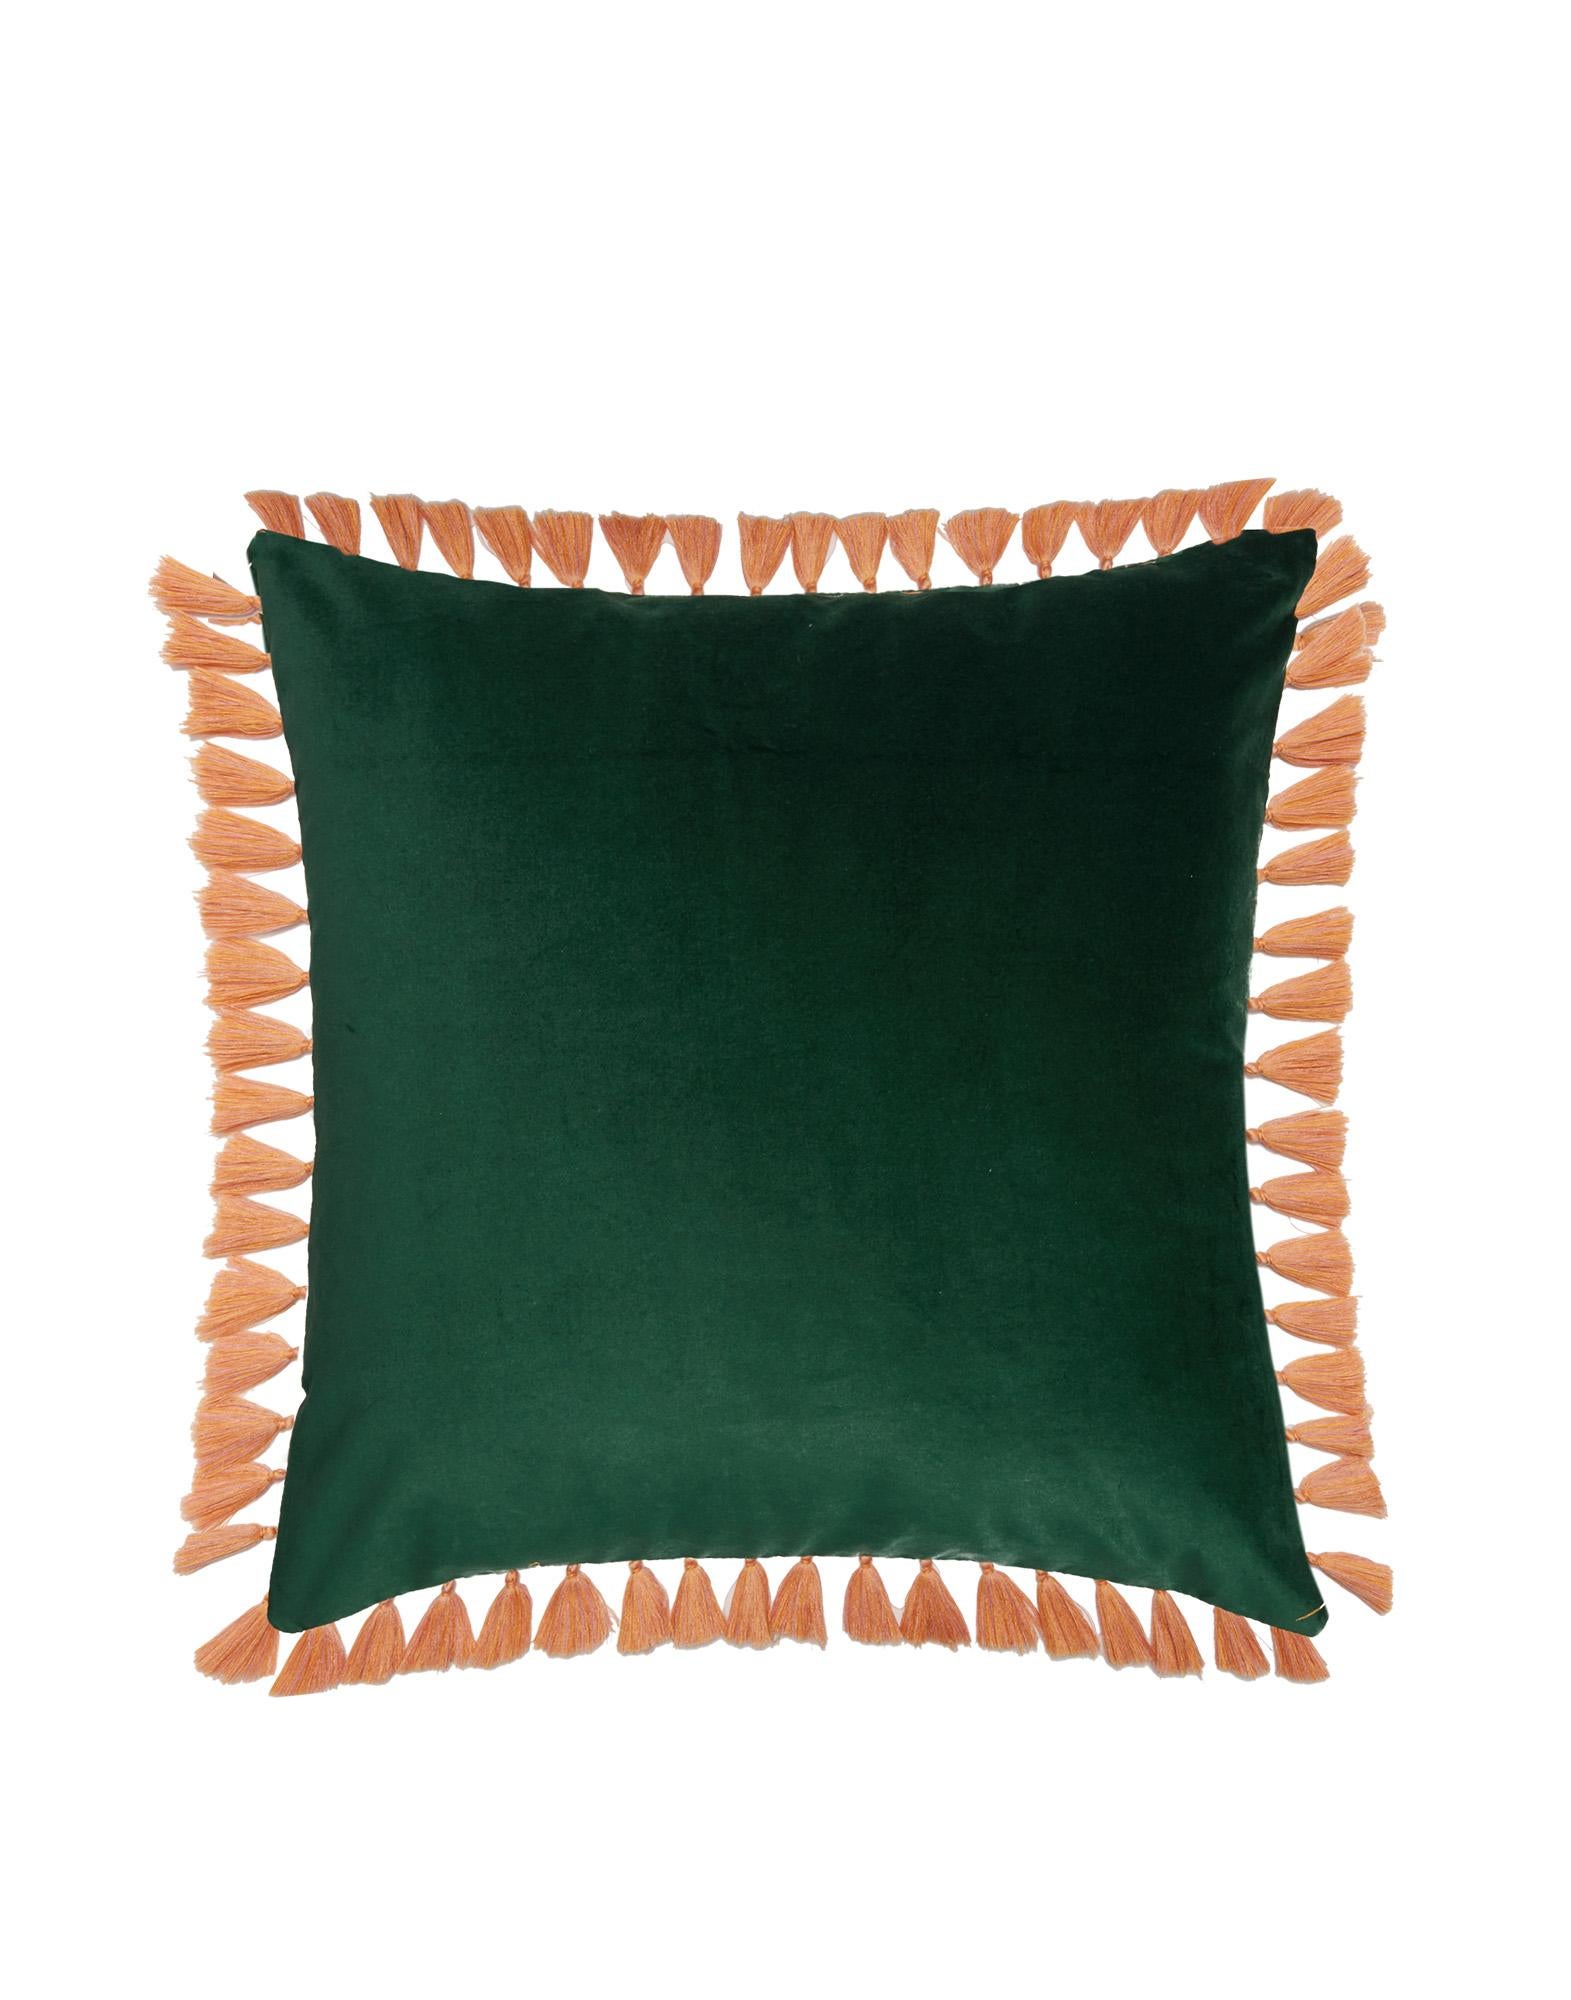 Let this luxurious Italian-made spirit animal cushion cover brighten your couch and uplift your soul. With a silky fringe tassel trim, it features a jungle-prowling tiger - representing personal strength and courage - printed onto our strokable